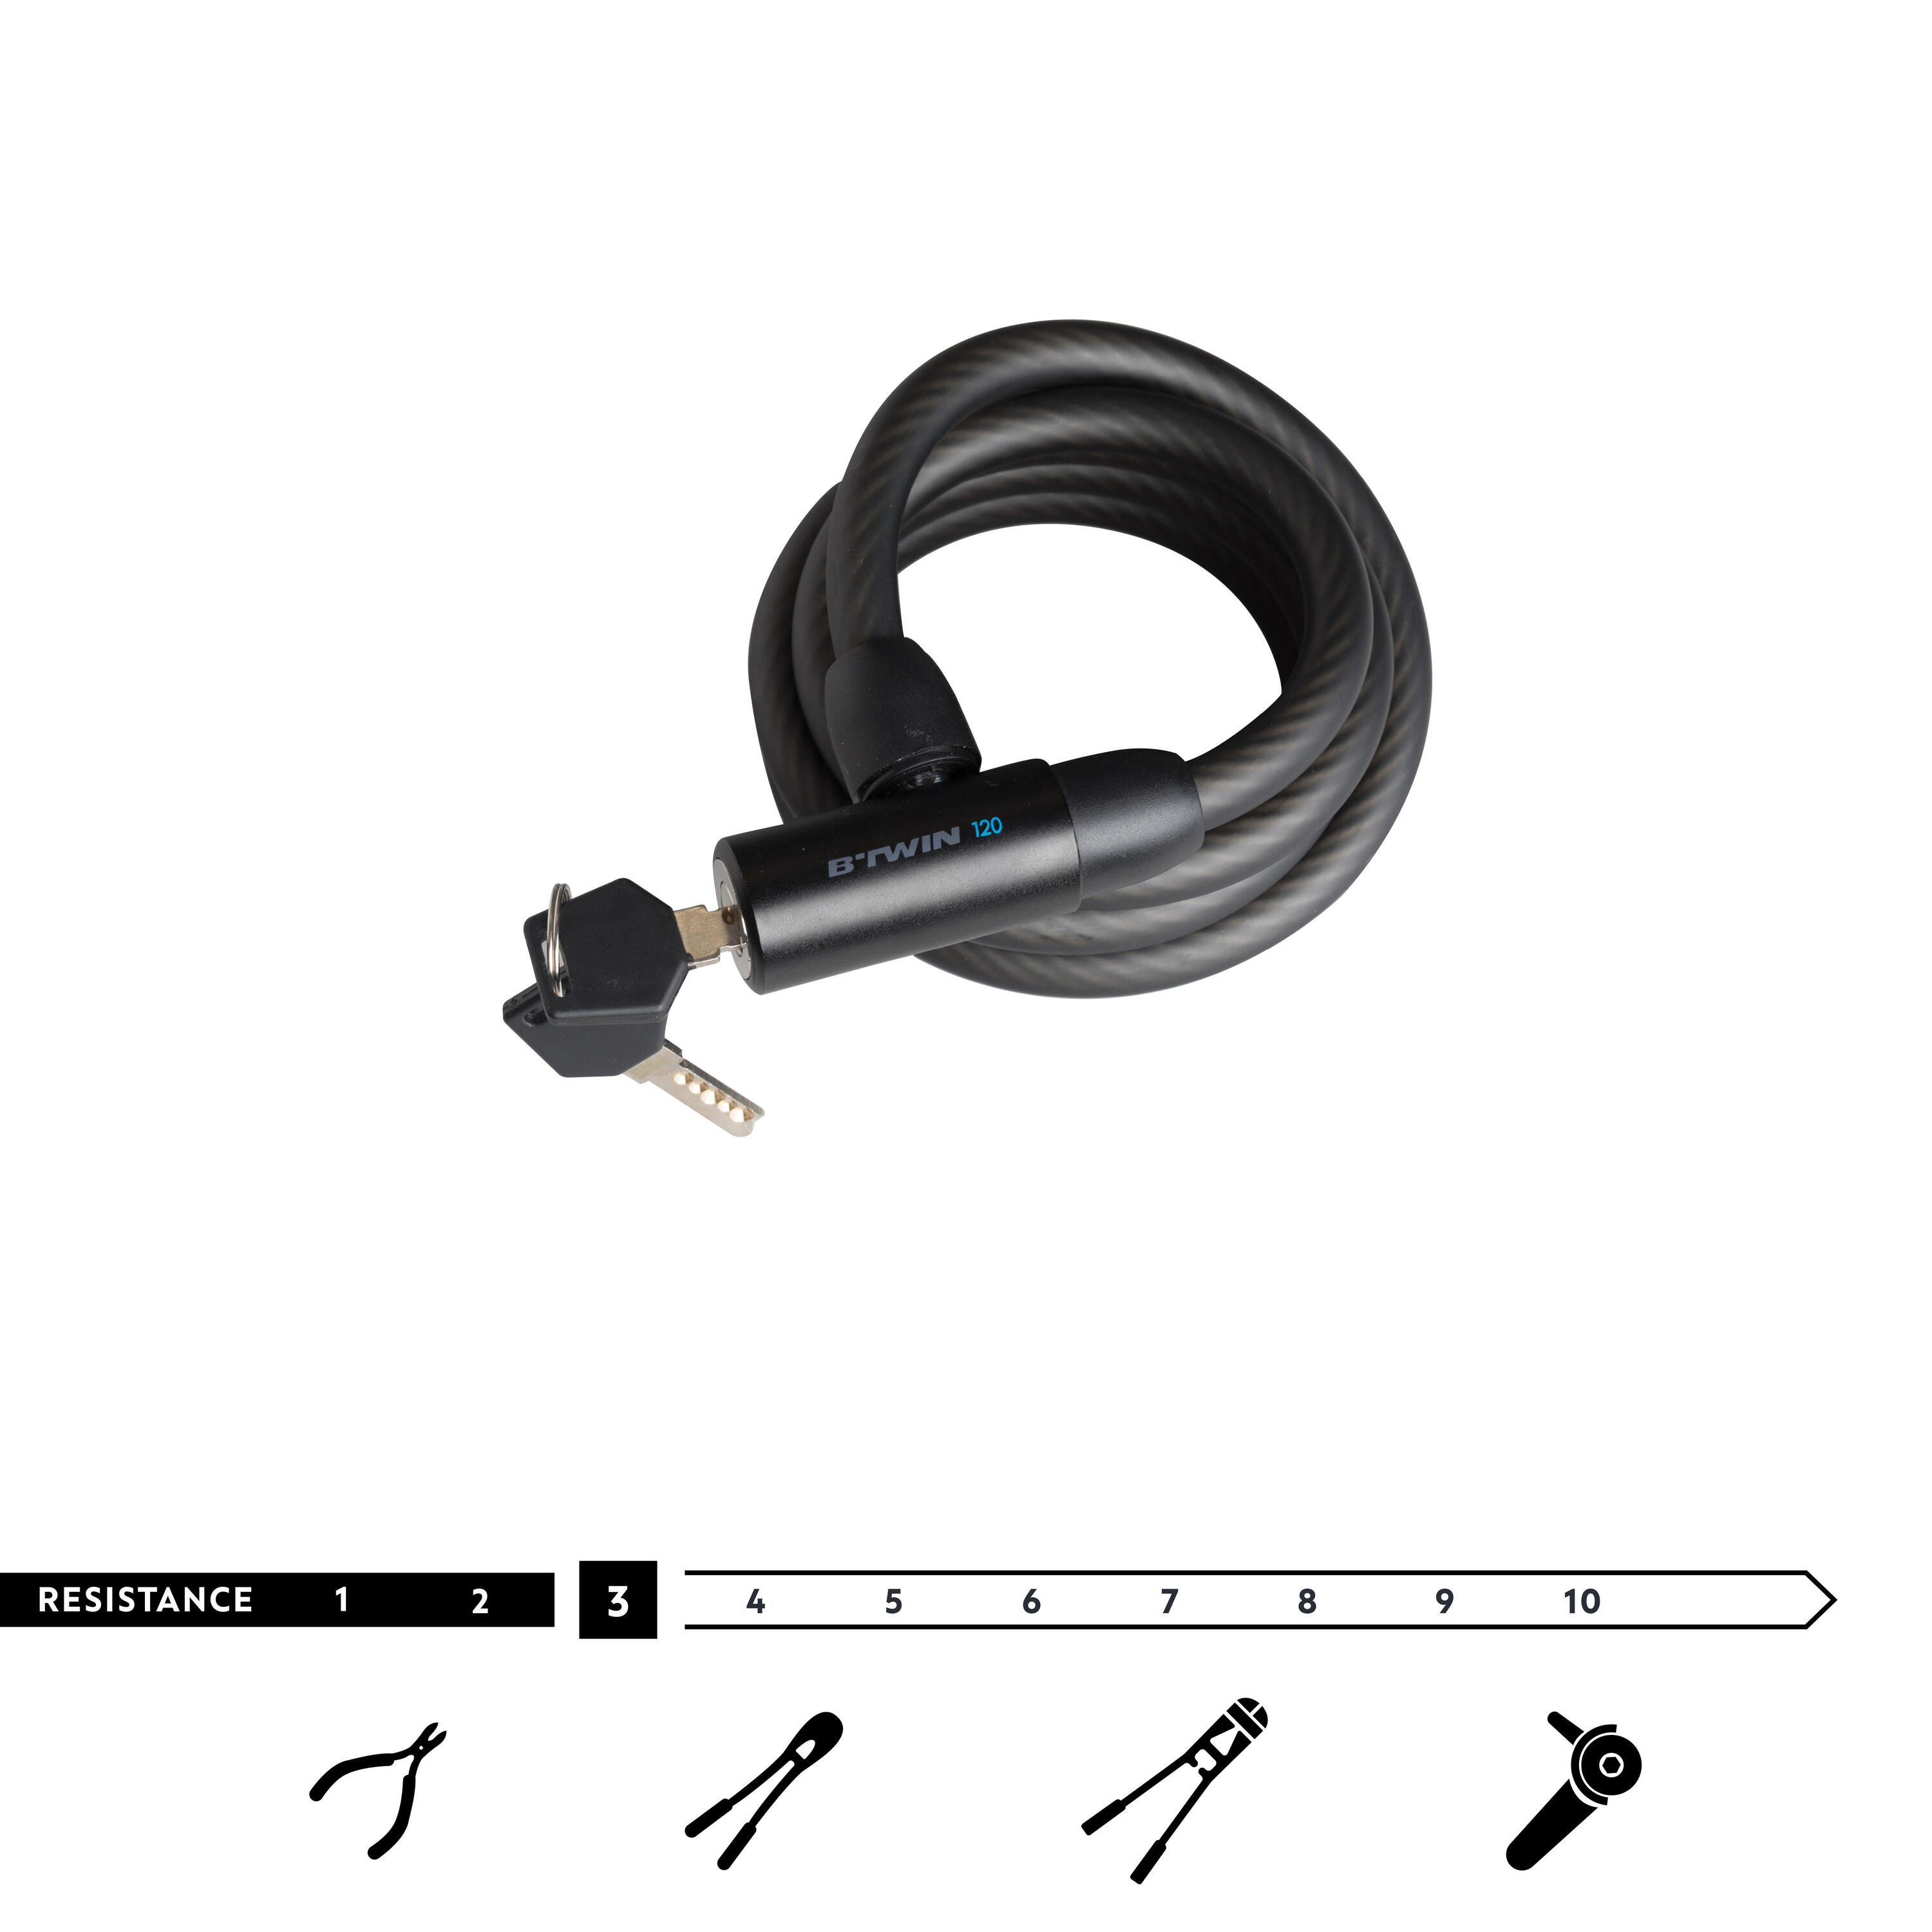 Bike Accessories Coil Cable Lock with Key 120 - Black 2/5